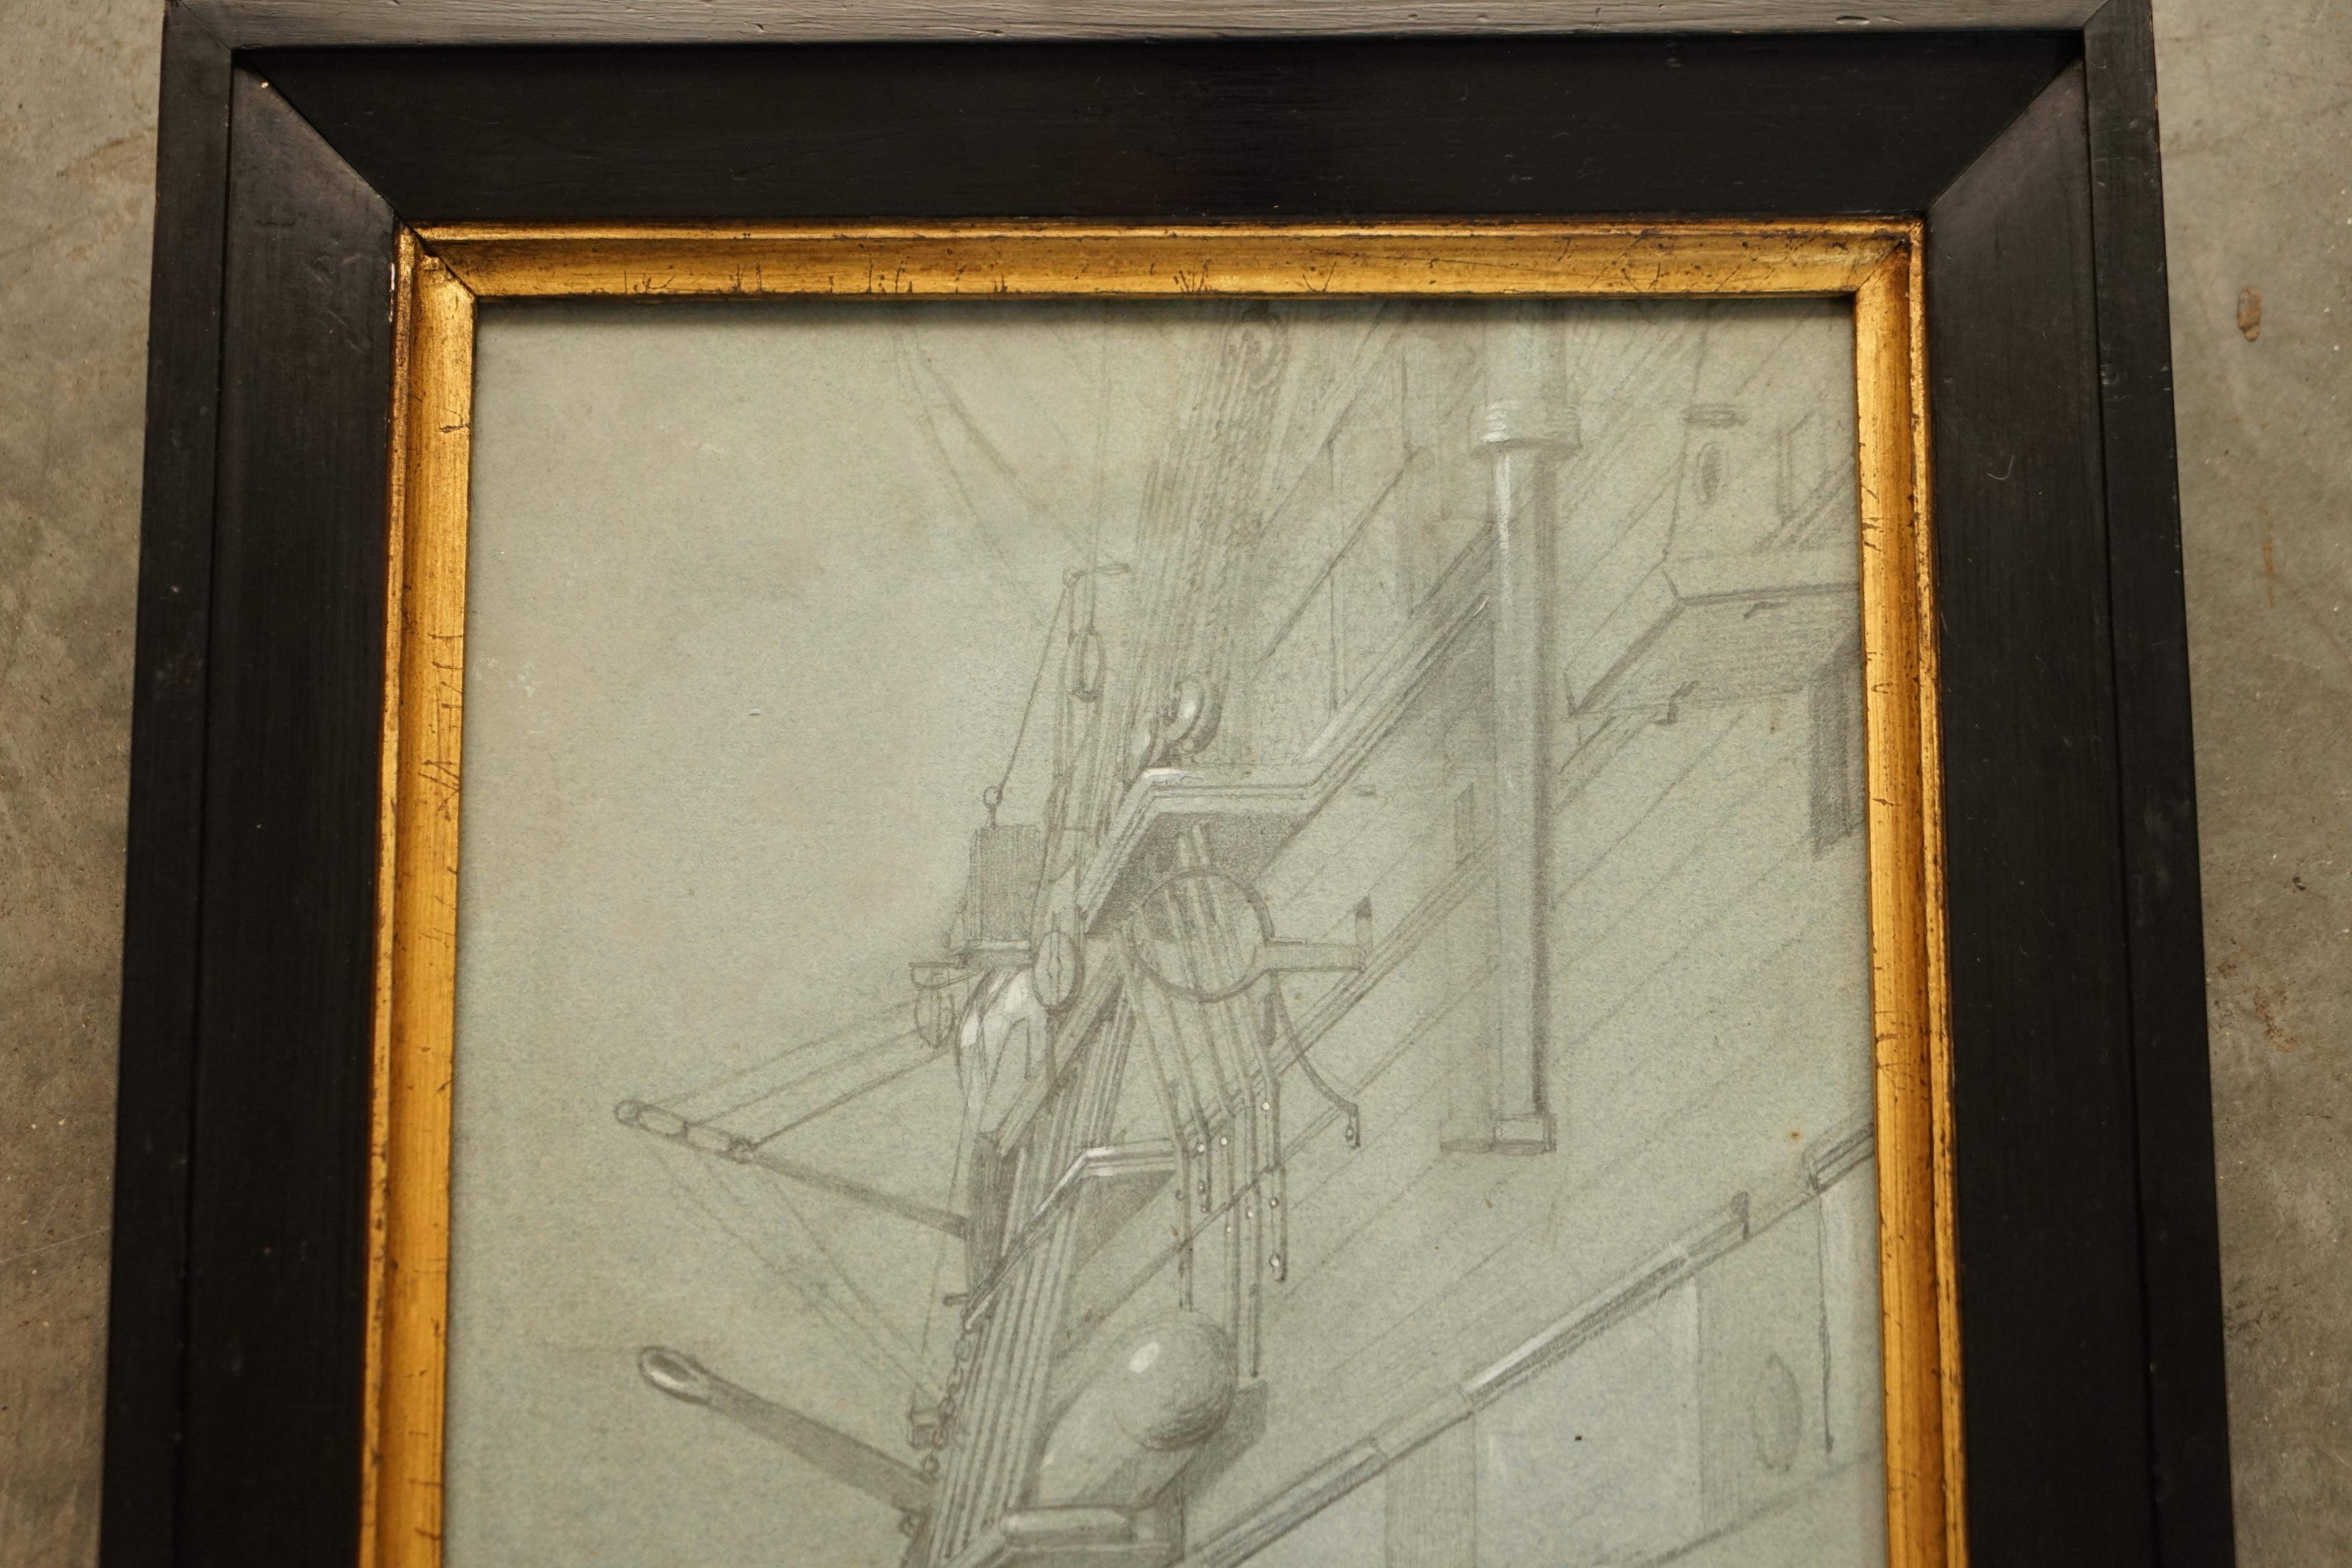 We are delighted to offer this exquisite circa 1850 French school chalk on paper sketch of the side of a ship

A beautiful example of the French school, the piece is very serene and looks intriguing

Condition wise is as pictured, very